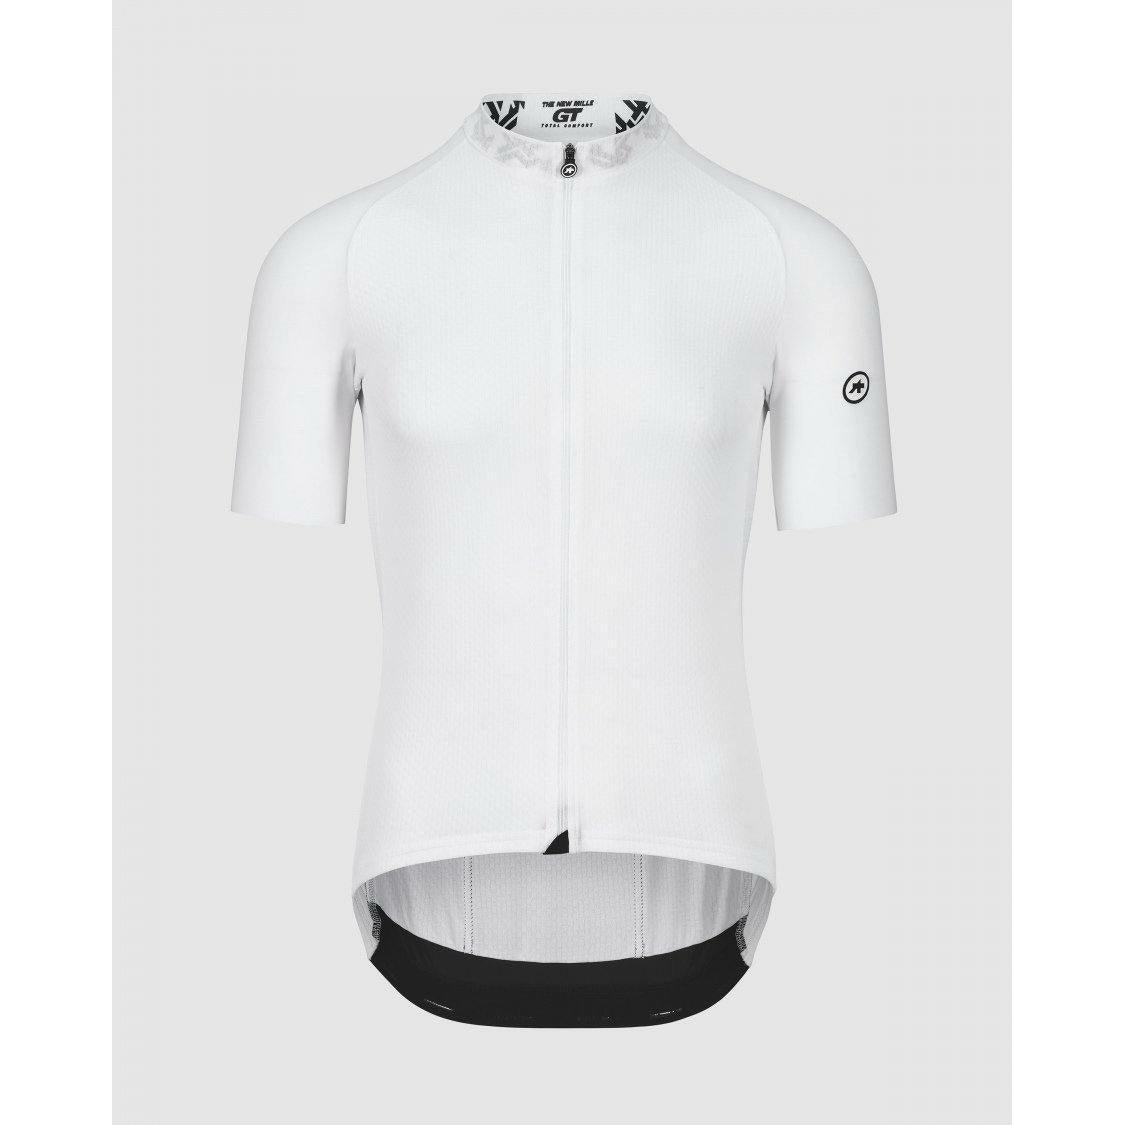 Assos of Switzerland Mille GT Summer SS Jersey C2 | Strictly Bicycles